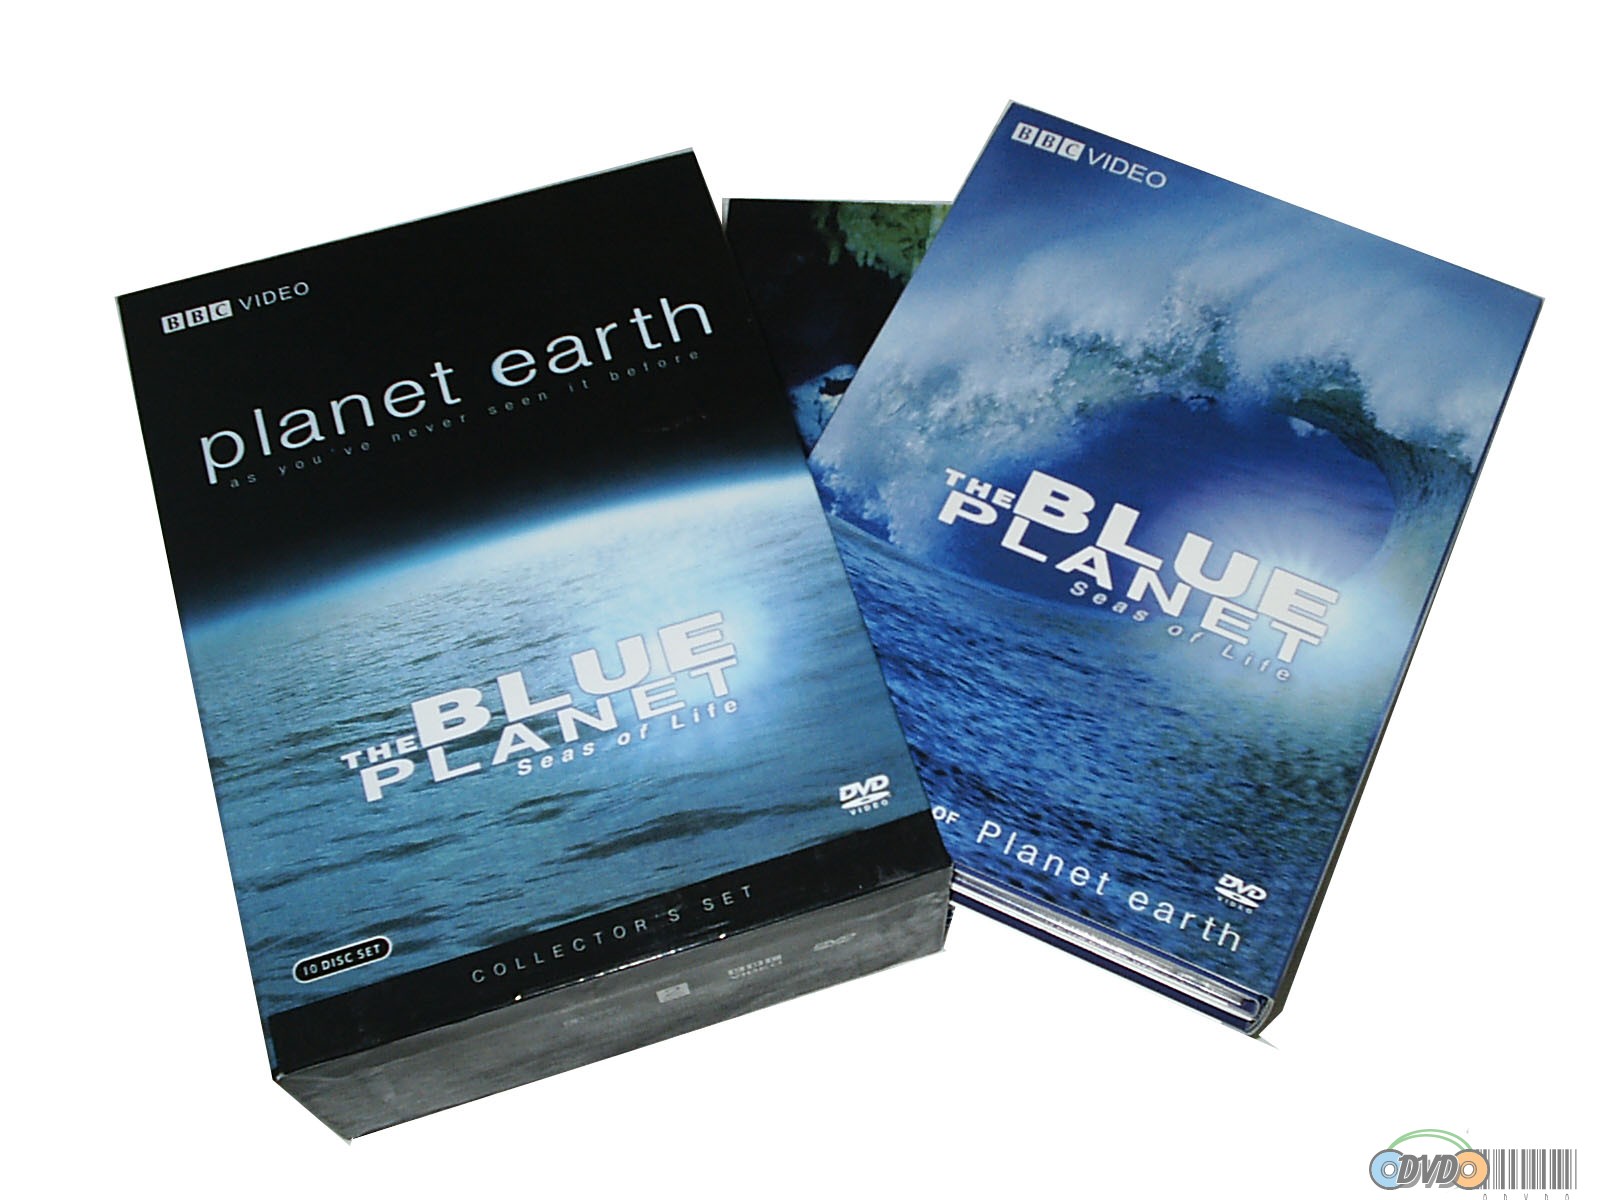 BBC Planet Earth AND The Blue Planet DVDS GIFT BOX SET ENGLISH VERSION